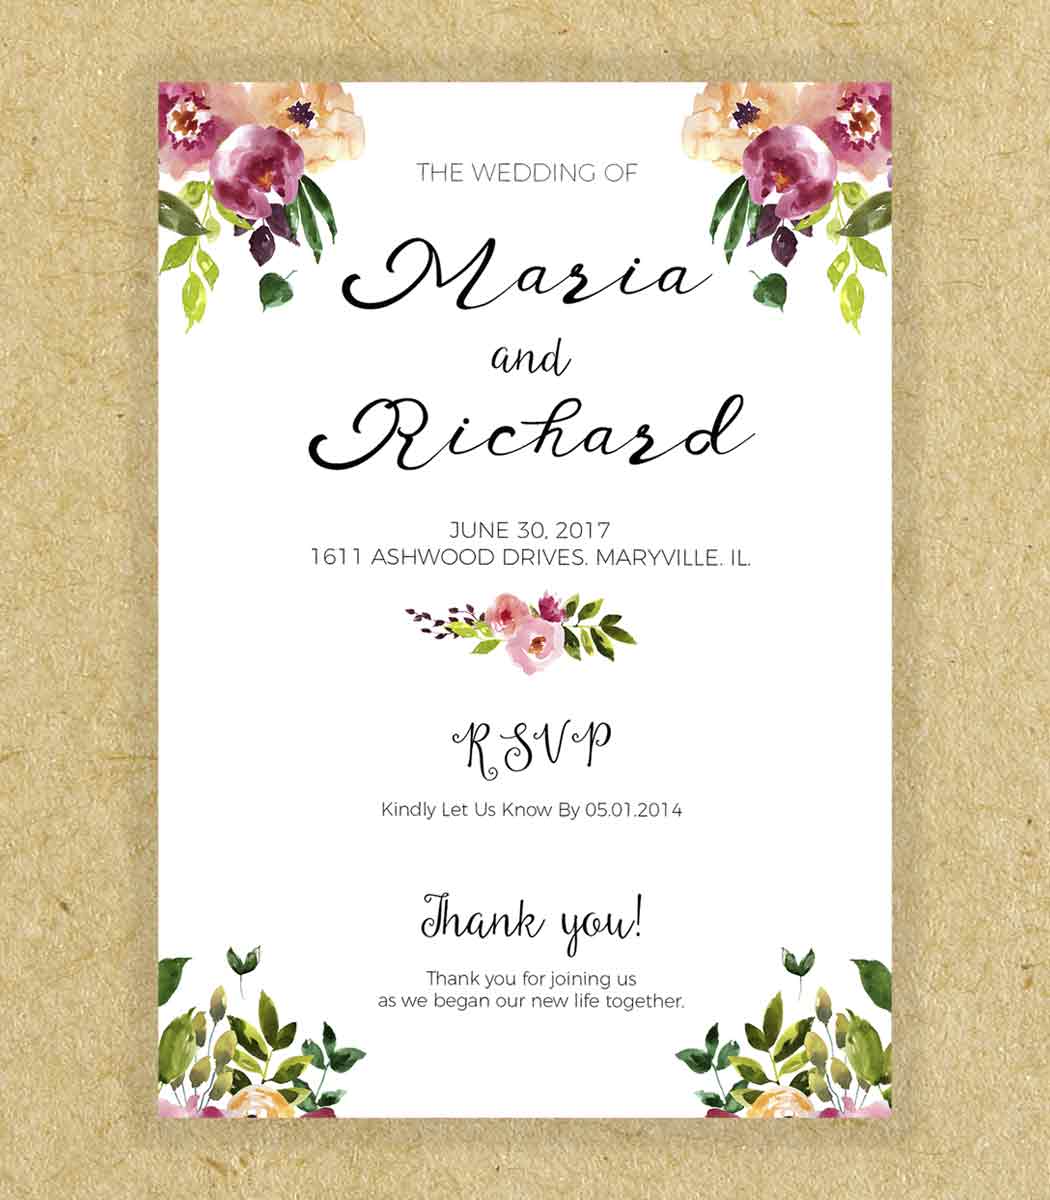 Wedding invitation cards for friends